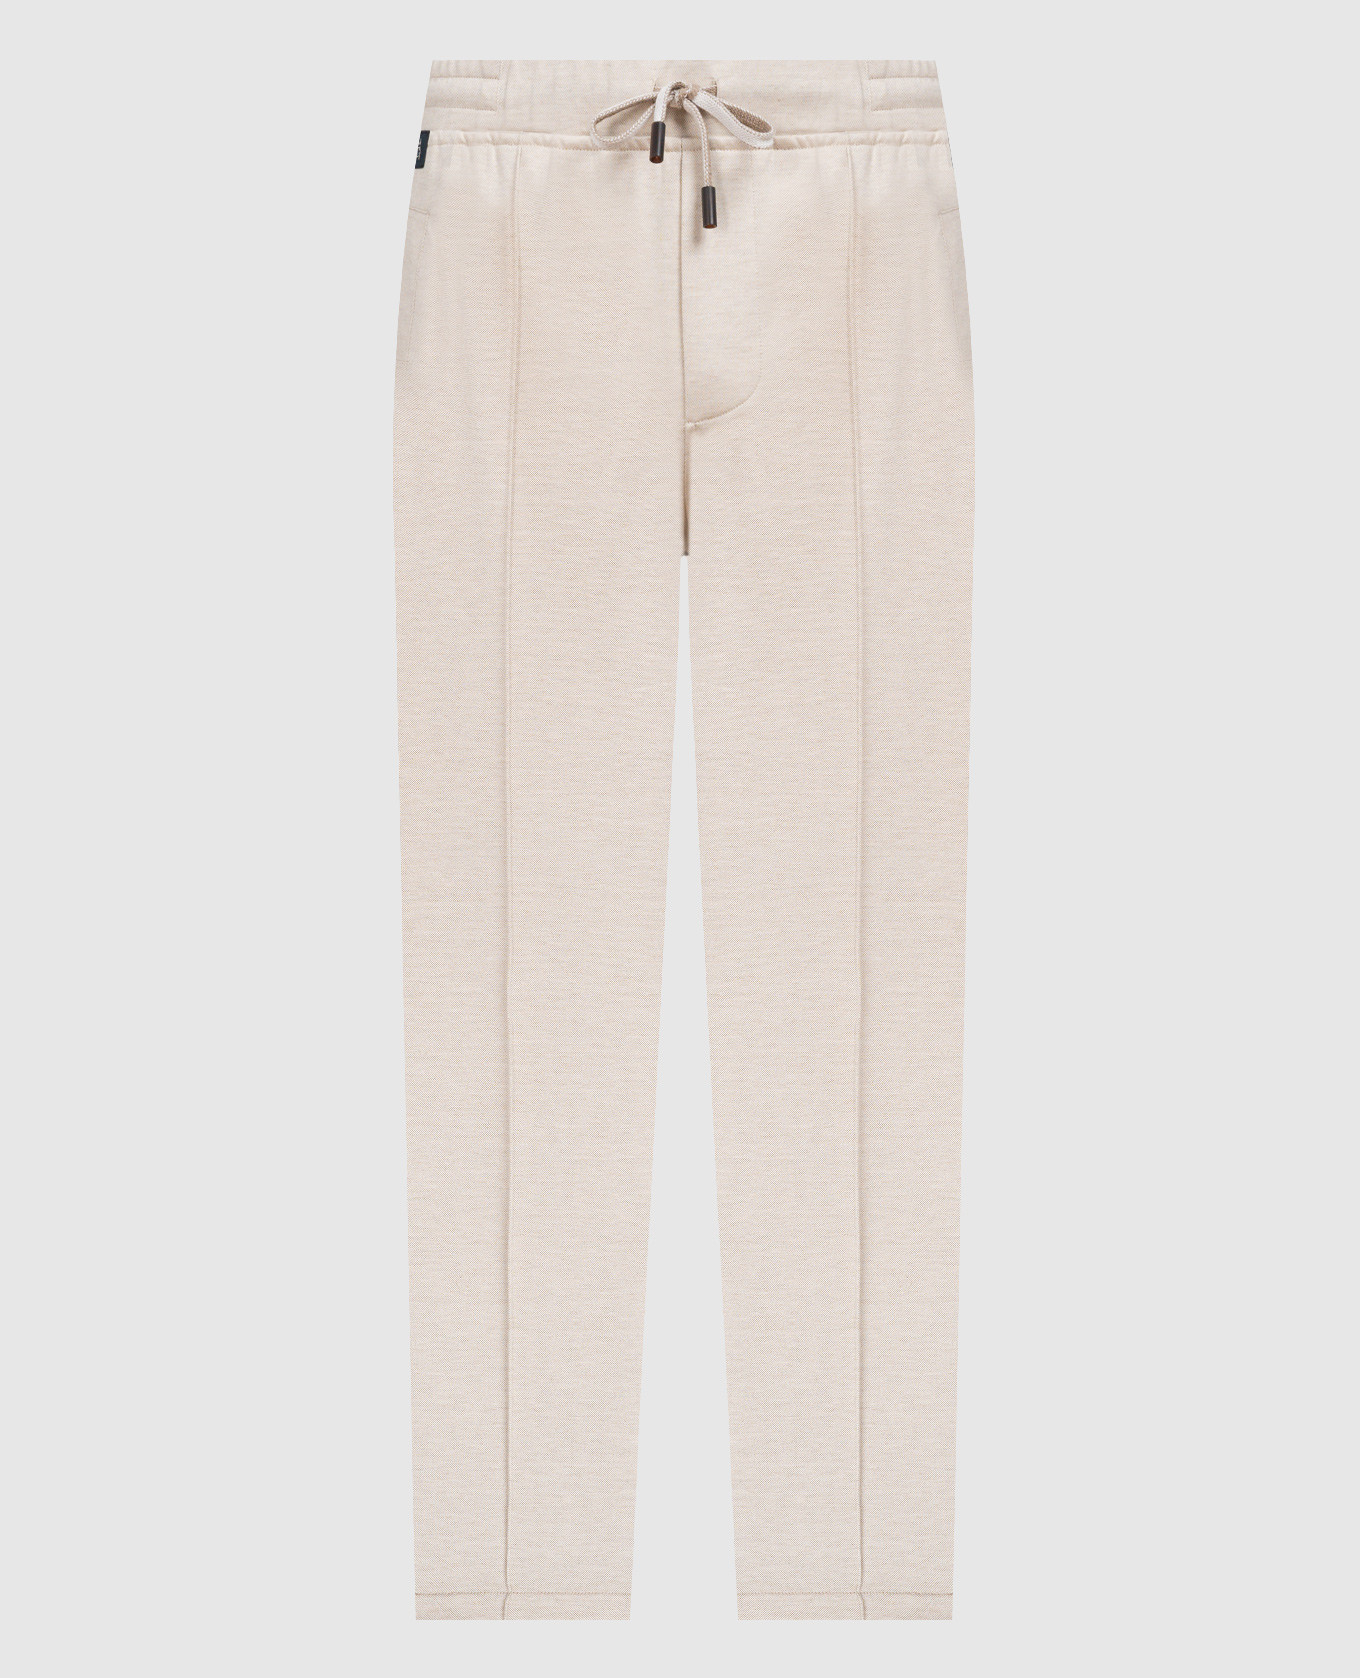 Beige sweatpants with a logo patch